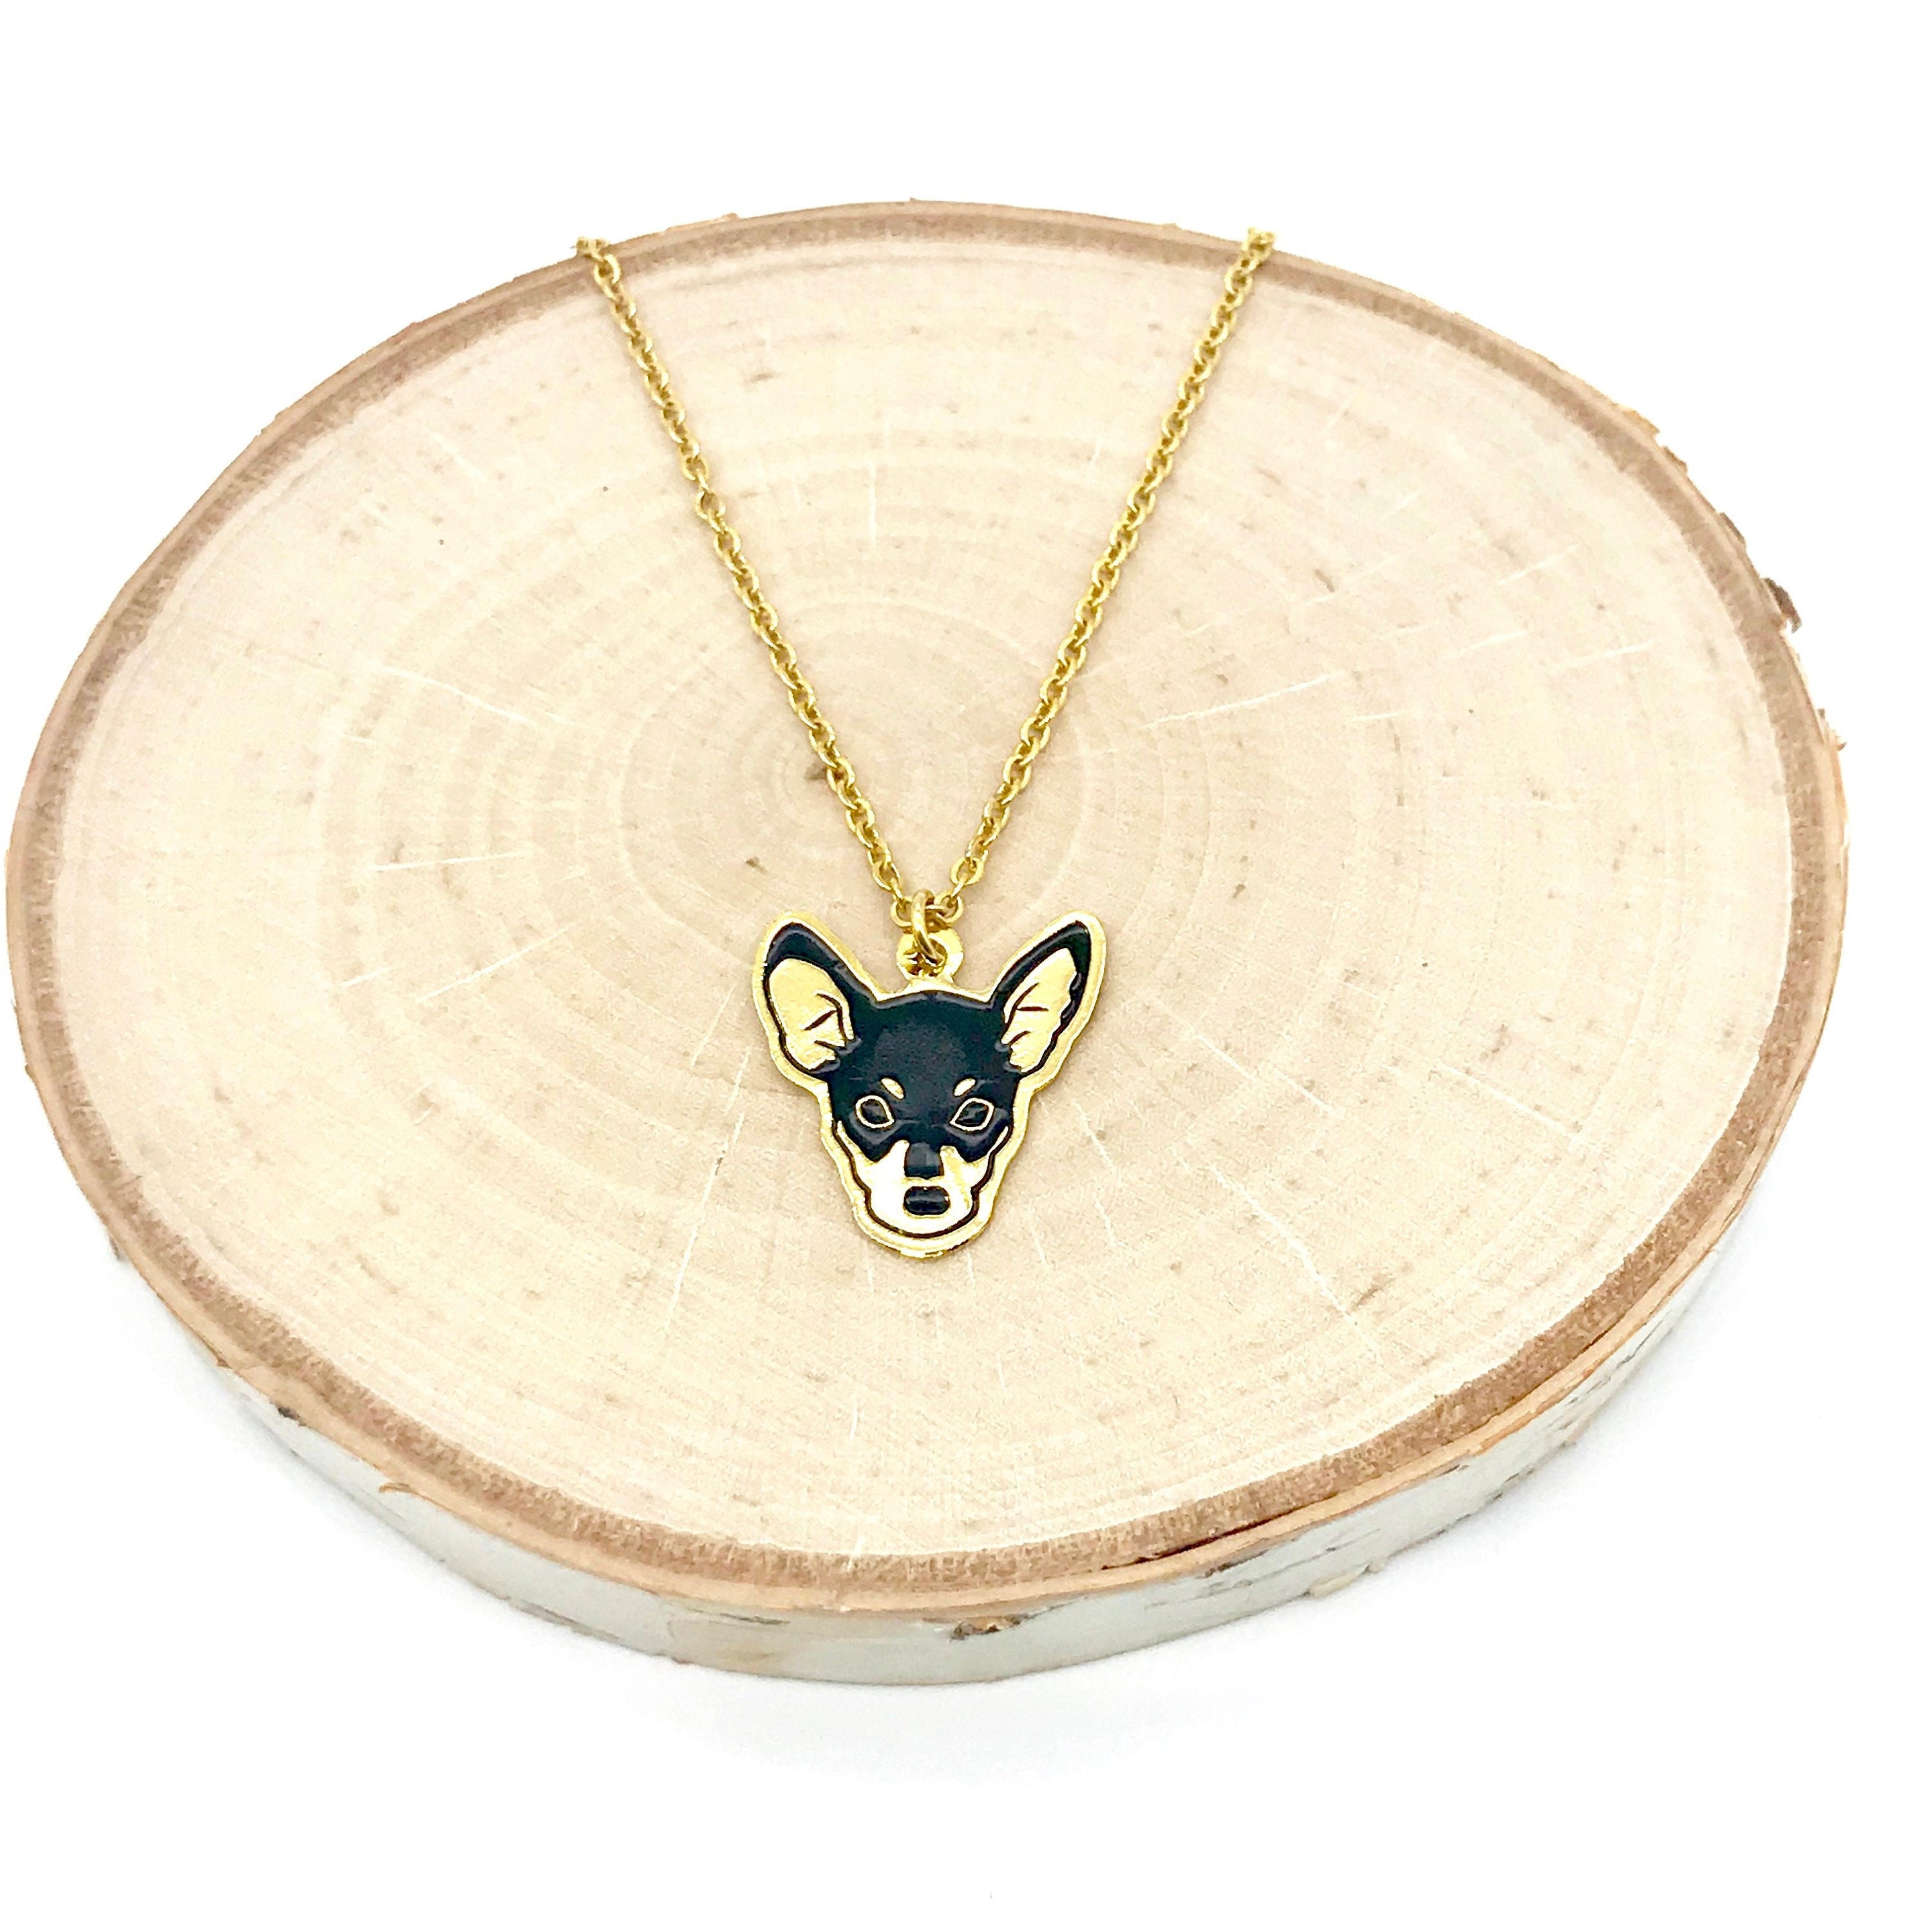 Pinscher Necklace, dog breeds, pet lovers, Necklace women, unique jewelry, Necklace, dog lovers, dog rescue, fashion jewelry